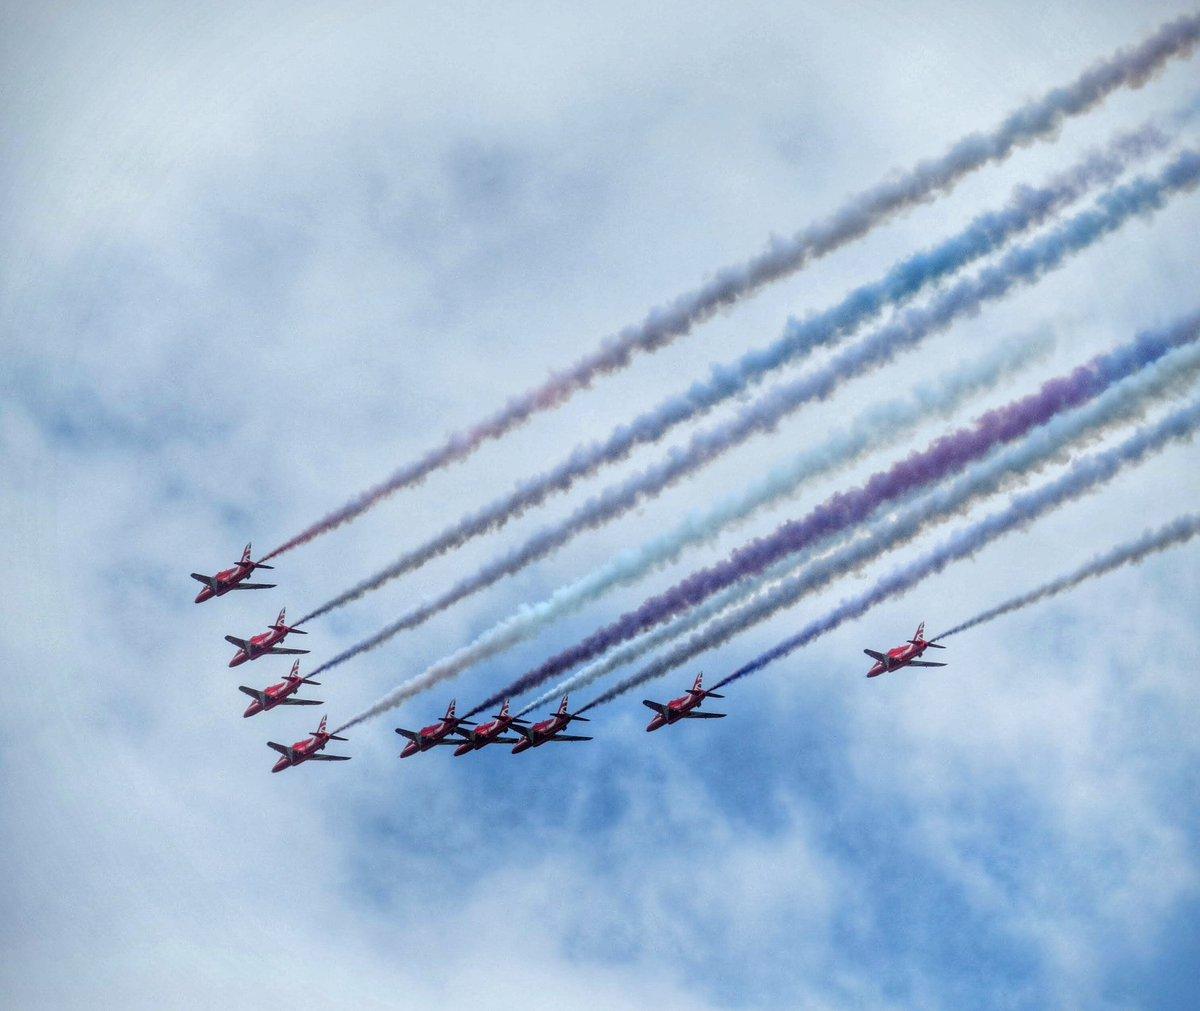 Clive Warr took this picture of the Red Arrows heading for RIAT